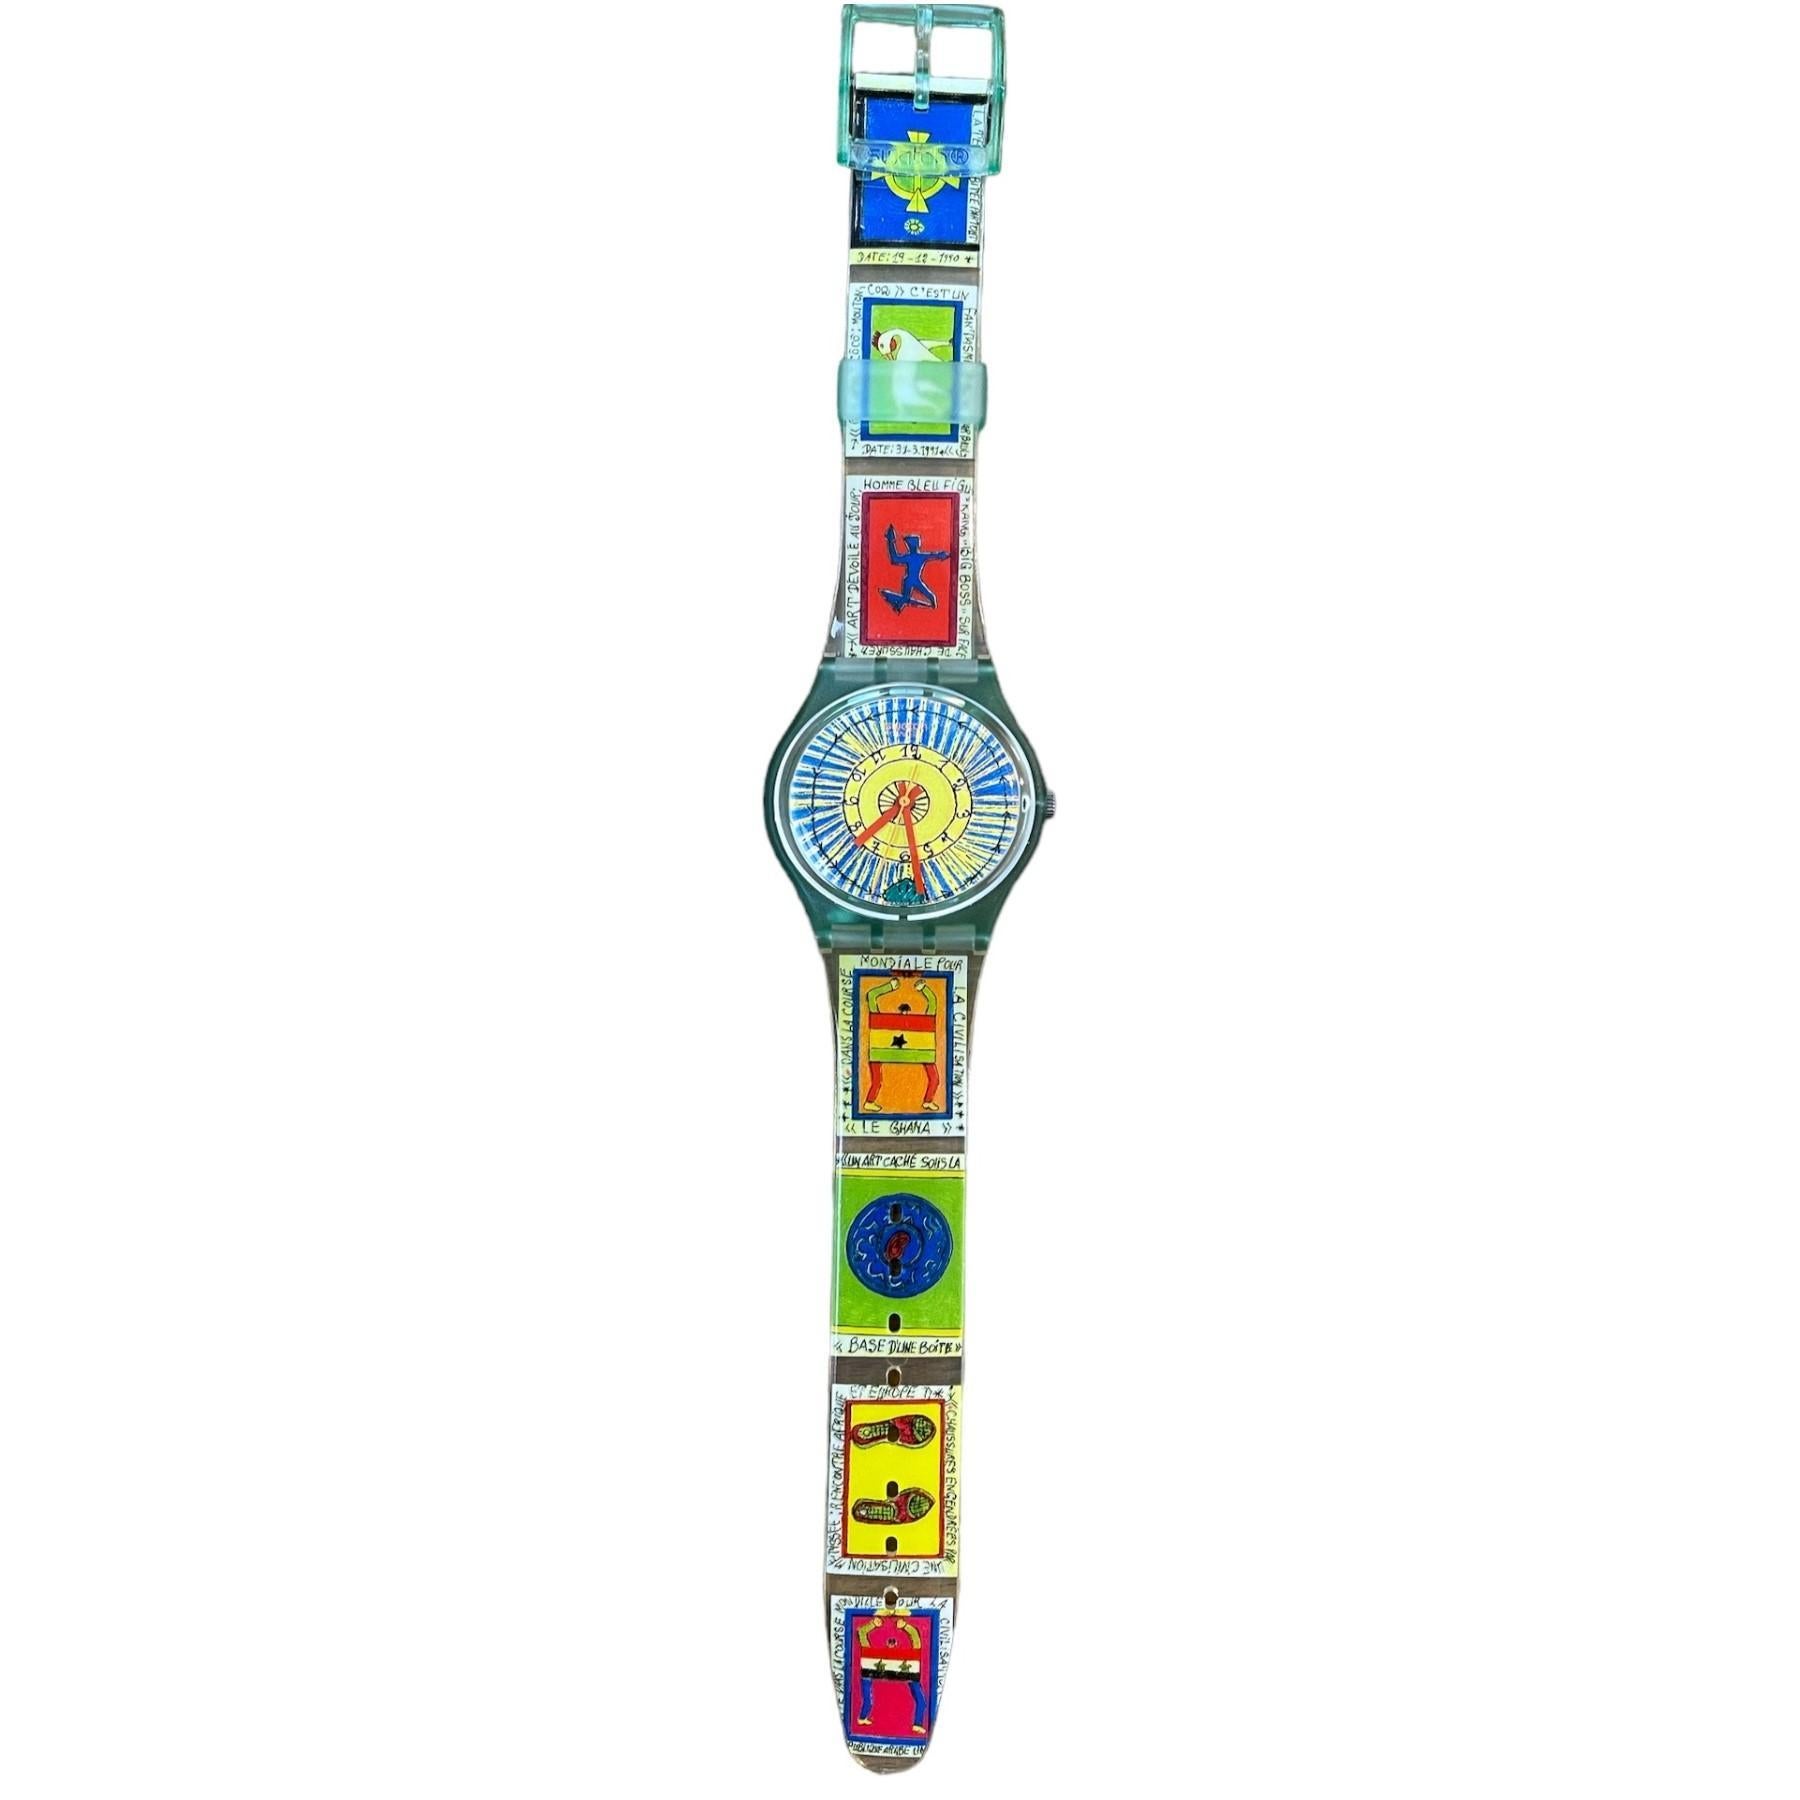 Discover the charm of this vintage Swatch watch, GG140 'CHEICK NADRO' designed by Frederic Bruly Boliabre in 1996. This timepiece is in very good condition, retaining its original strap.

Designer Piece: Designed by Frederic Bruly Boliabre, this